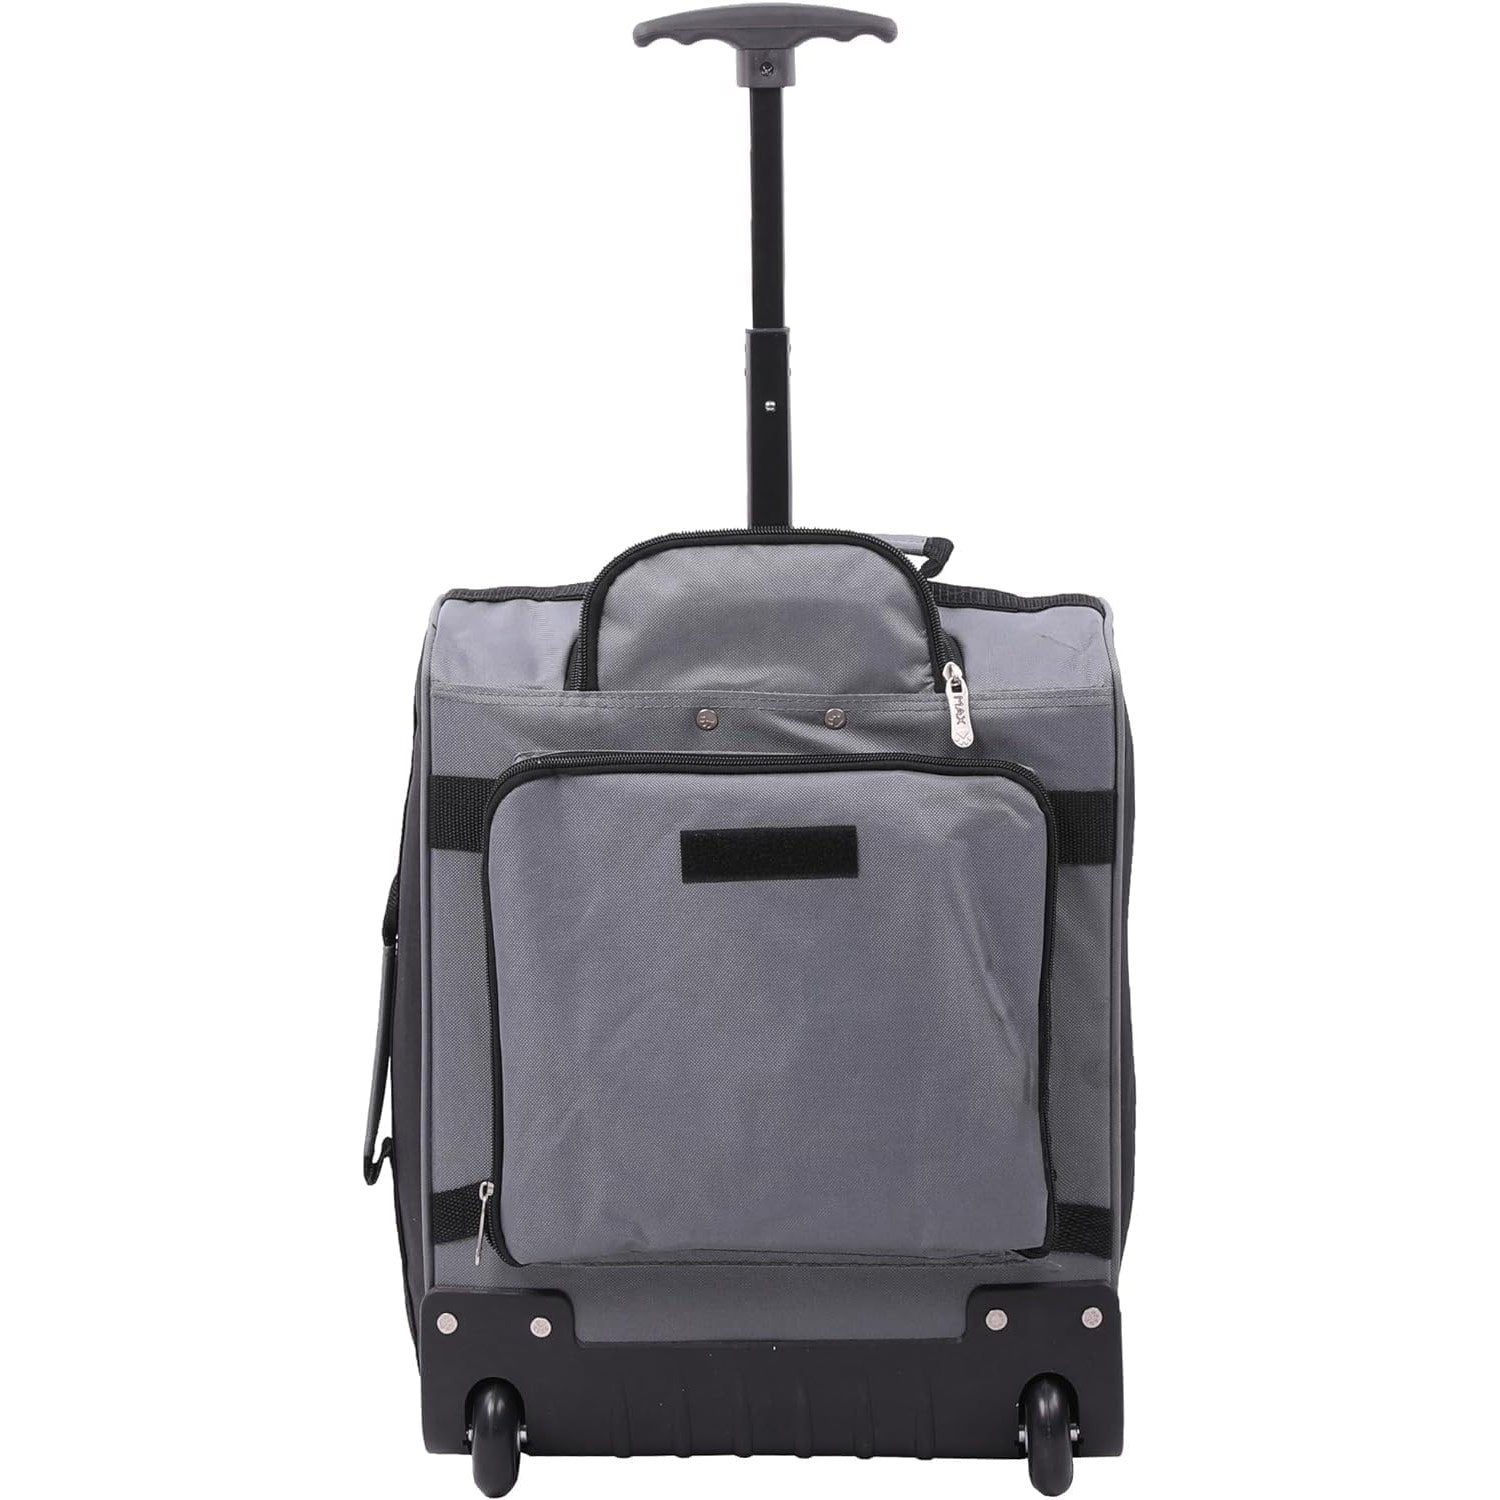 Aerolite MiniMAX (45x36x20cm) easyJet Maximum Cabin Luggage Under Seat Carry On Suitcase with Backpack and Pouch, 2 Year Warranty